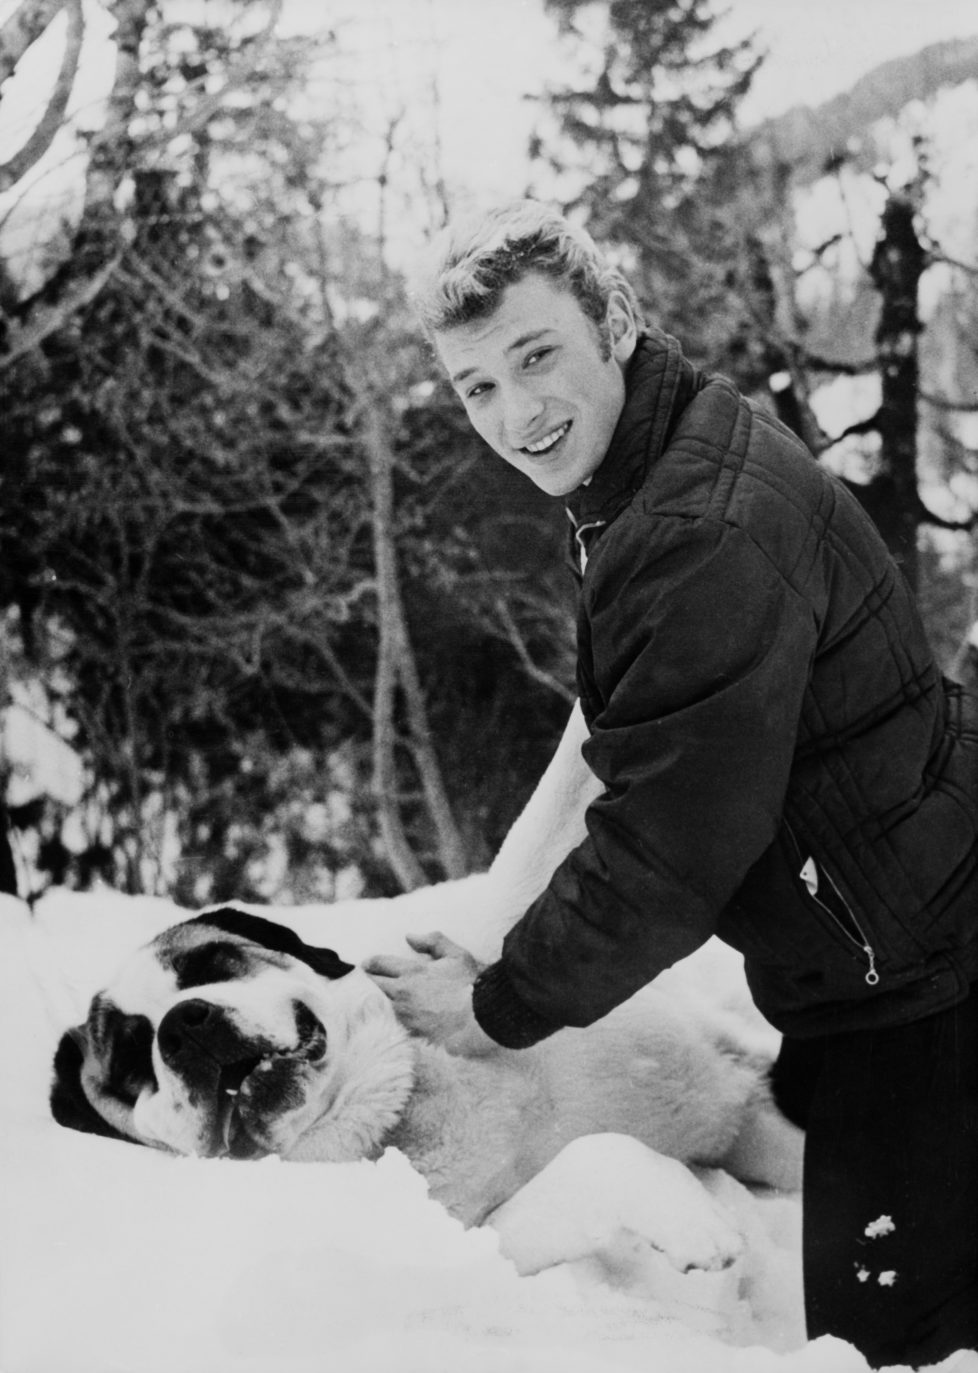 GSTAAD, SWITZERLAND - JANUARY 07: Johnny Hallyday playing with a Saint Bernard dog in Gstaad, Switzerland, on January 7, 1962. (Photo by Keystone-FranceGamma-Rapho via Getty Images) *** Local Caption *** Johnny Hallyday